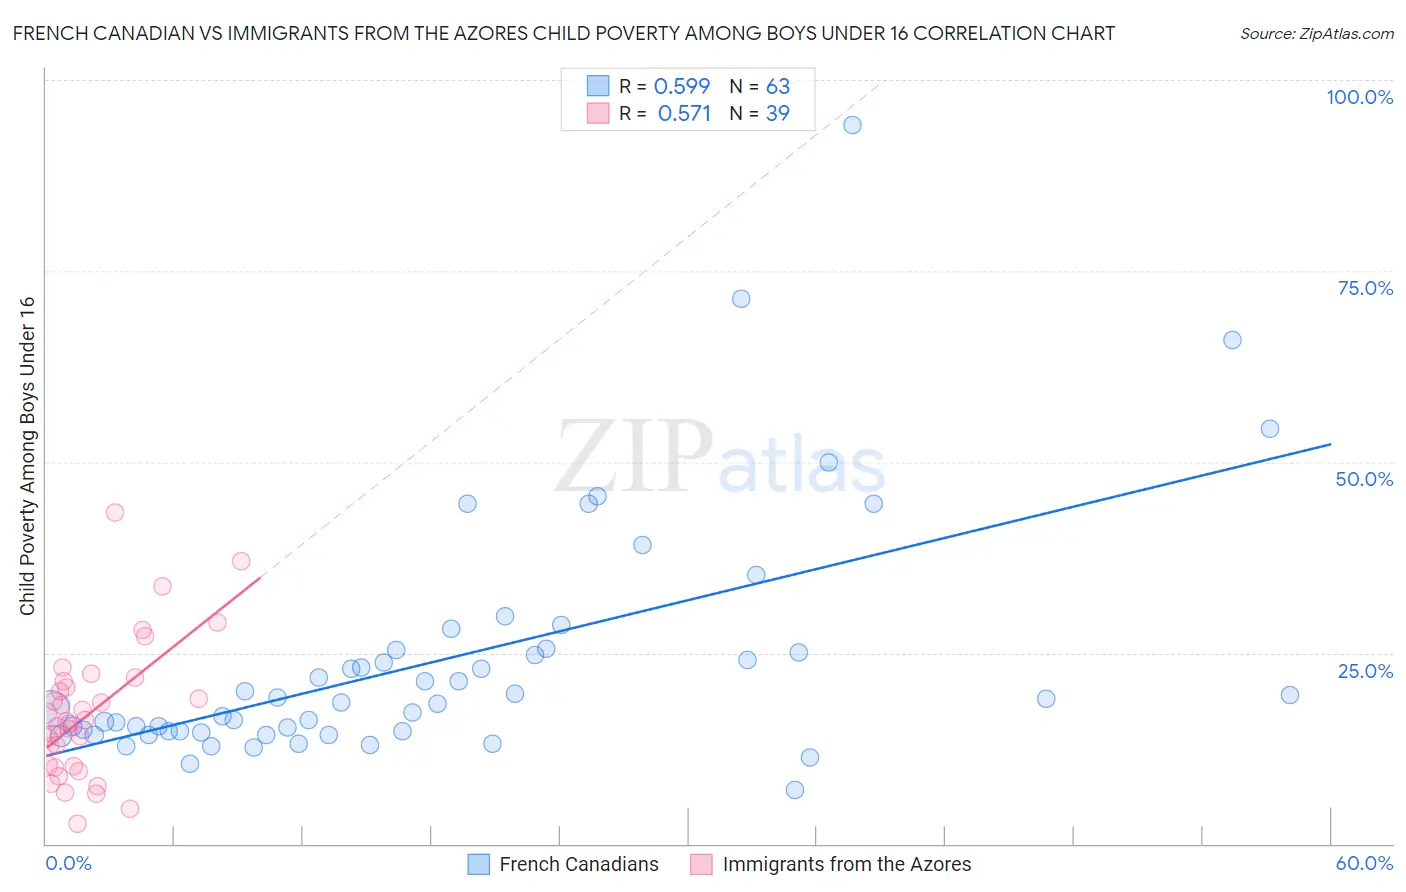 French Canadian vs Immigrants from the Azores Child Poverty Among Boys Under 16